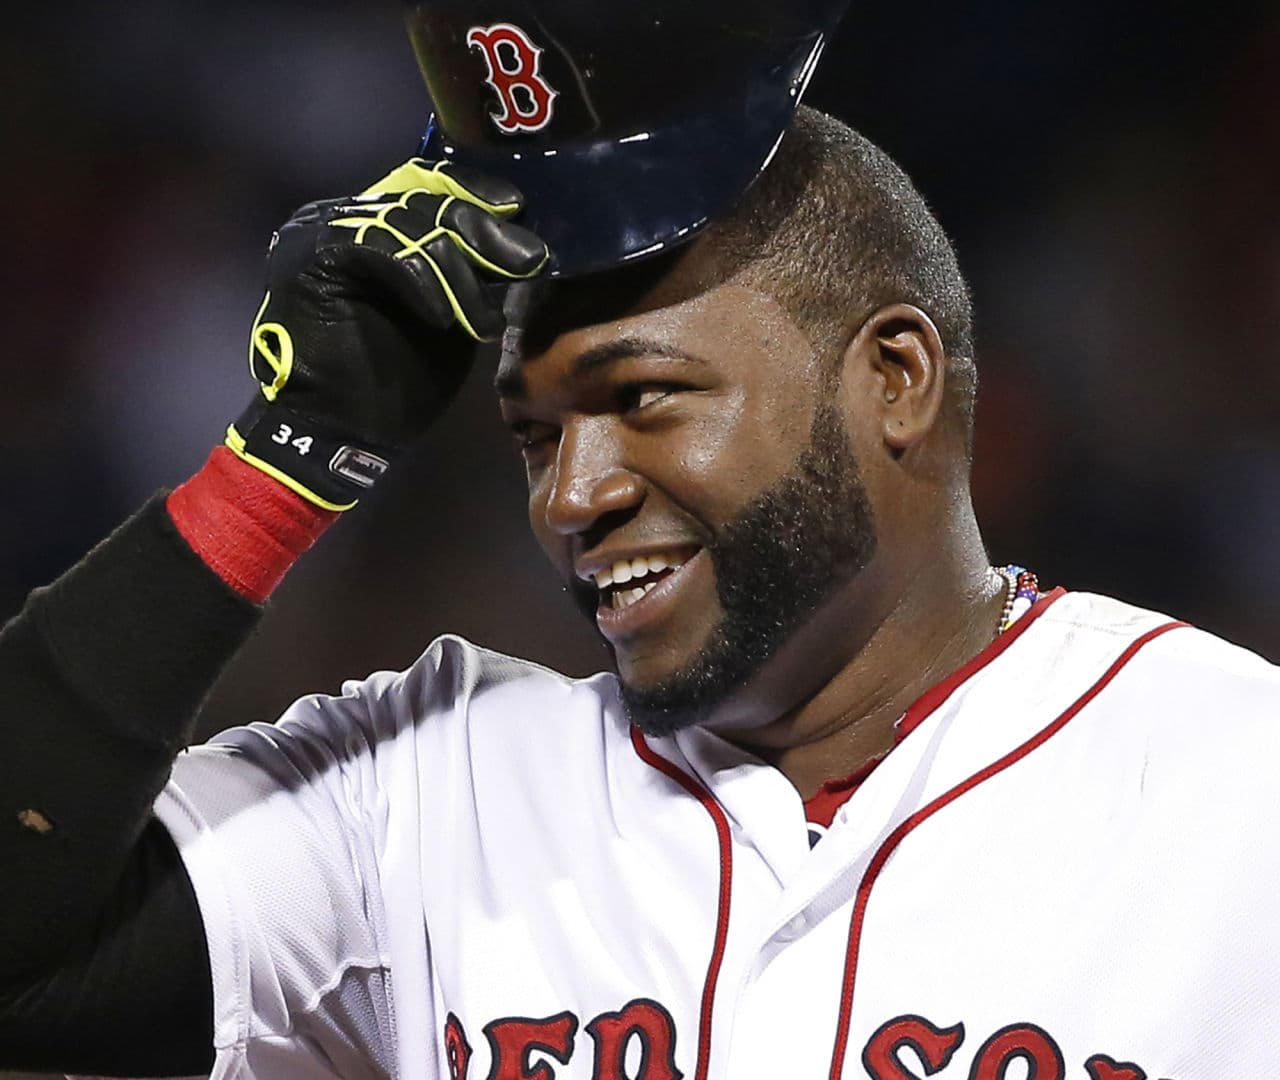 In this Aug. 20, 2014, file photo, Boston Red Sox designated hitter David Ortiz tips his cap while standing on third base during a baseball game against the Los Angeles Angels at Fenway Park in Boston. (Elise Amendola/ AP)